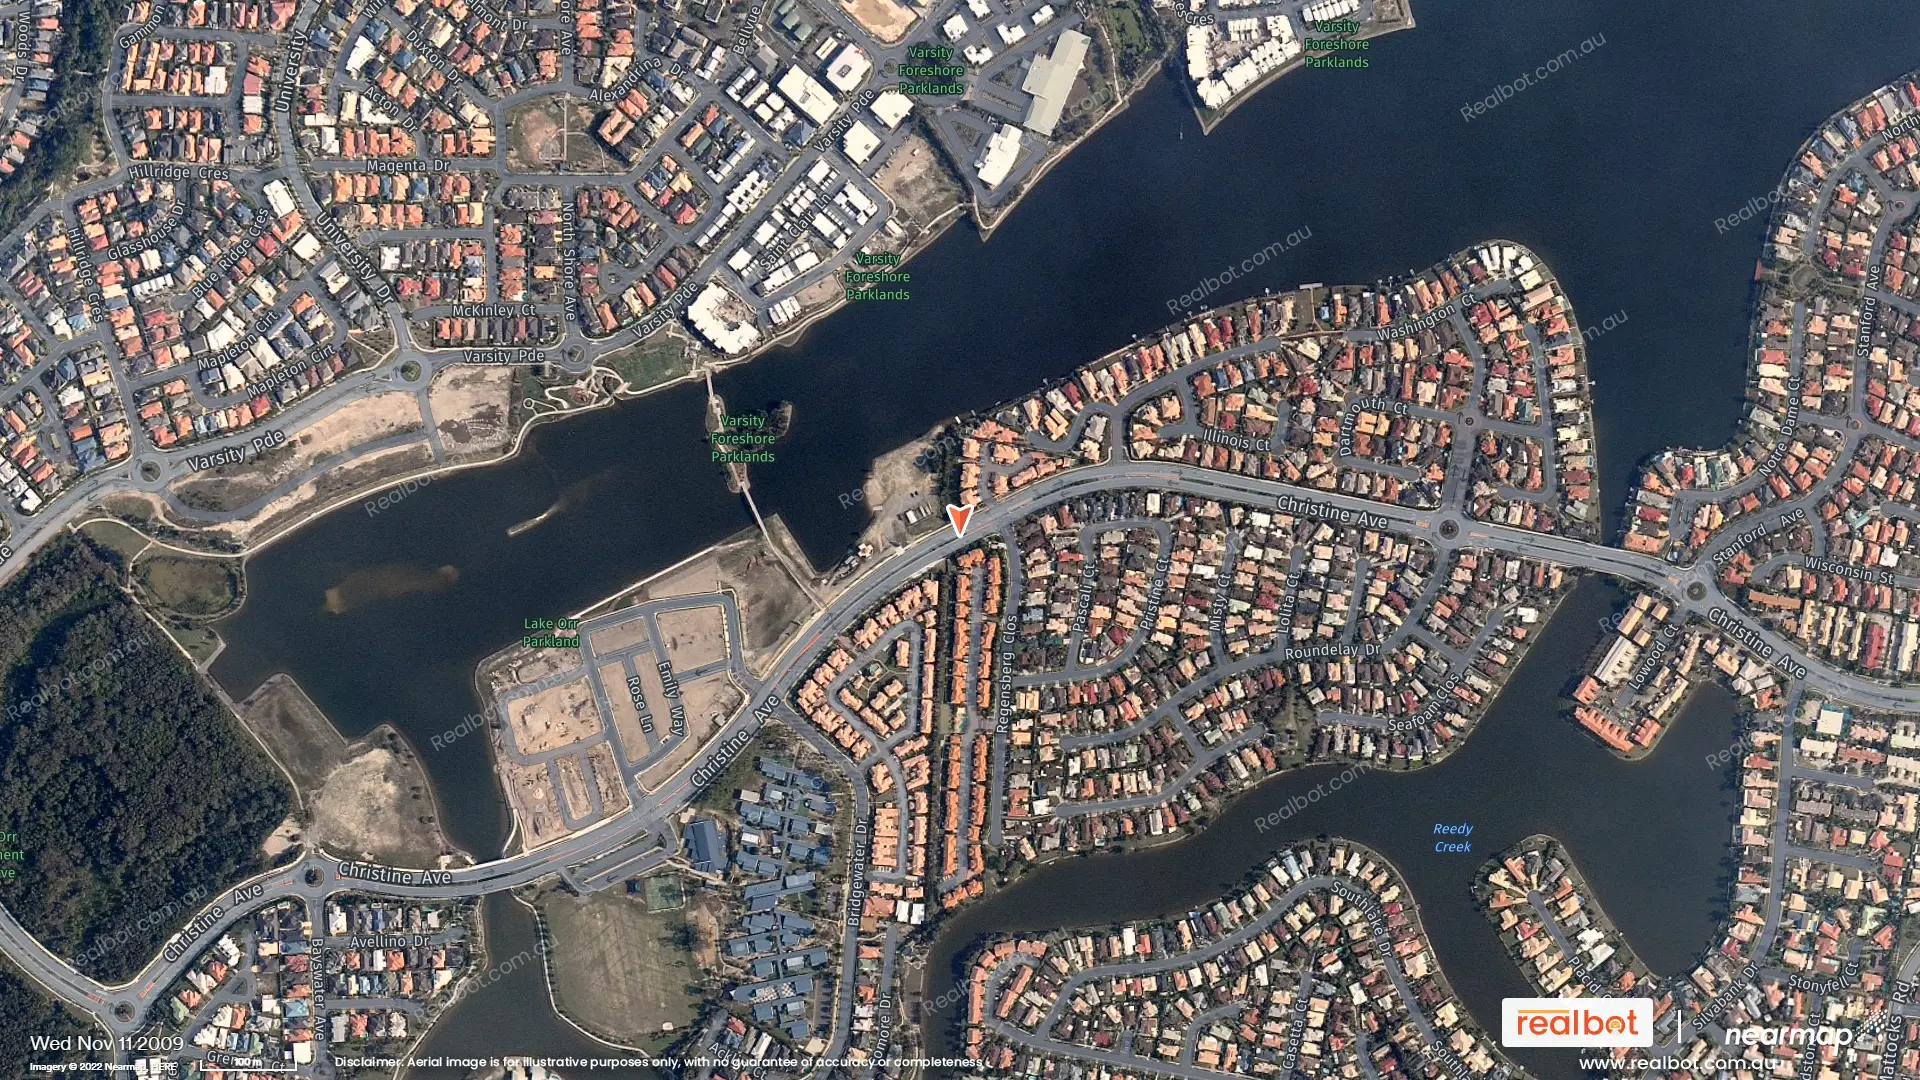 varsity-lakes-qld-4227-Suburb-Profile-And-Aerial-Images-Real-Search